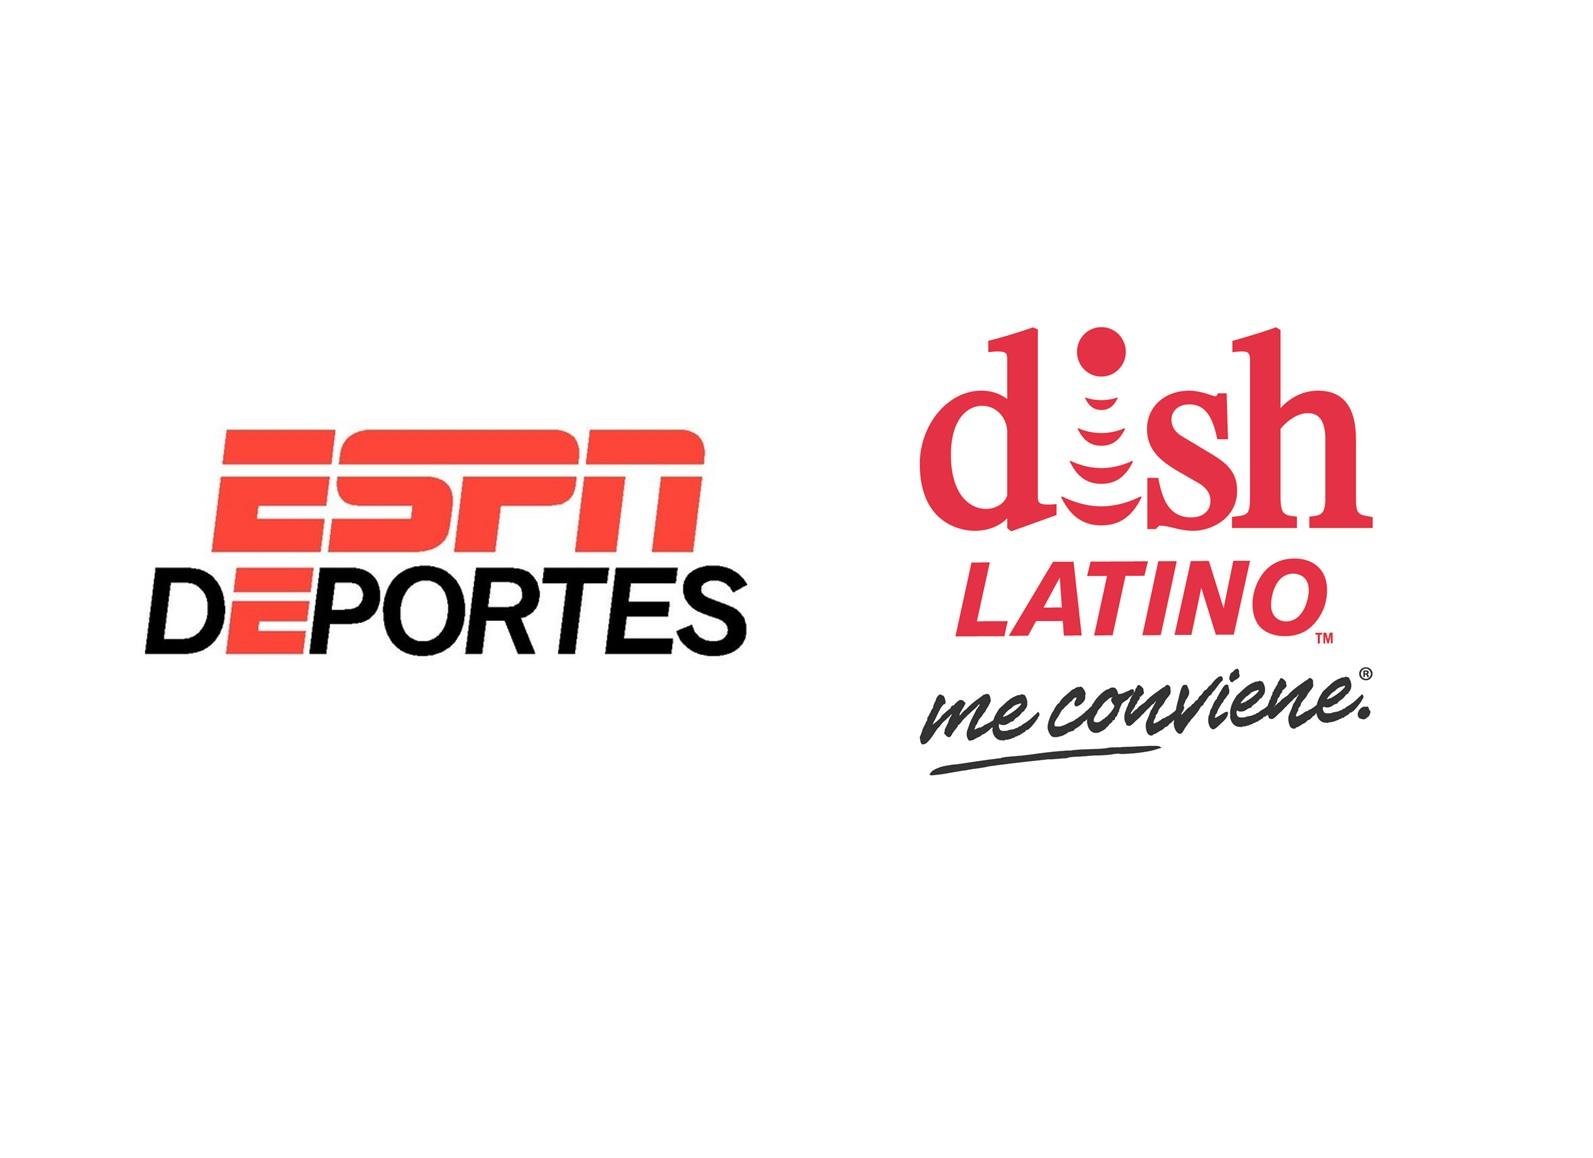 DishLATINO Logo - ESPN Deportes Now Available in HD to DishLATINO Subscribers Ahead of ...